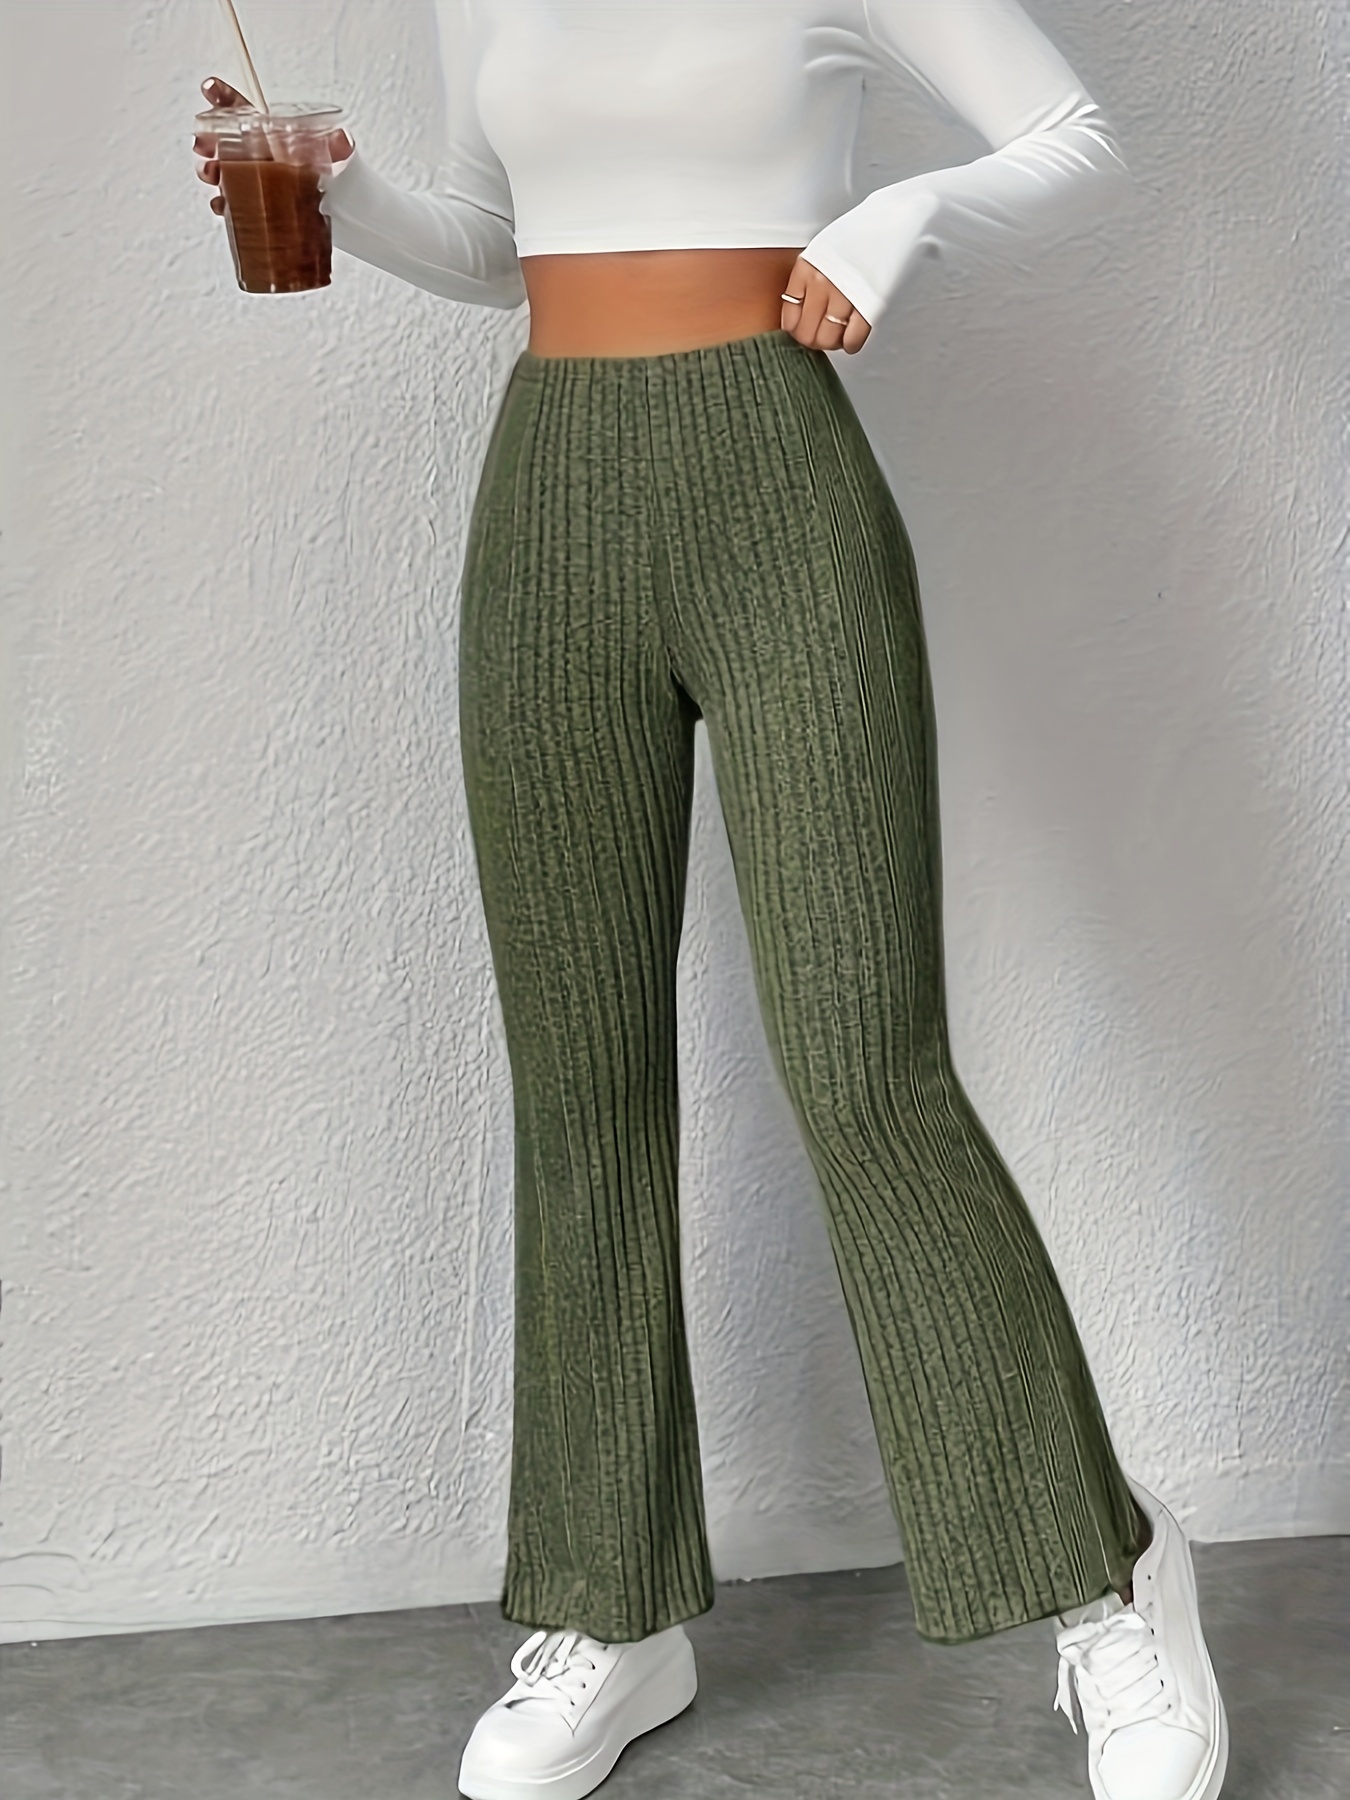 Flare Leg Rib-knit Pants  Knit pants outfit, Flared pants outfit